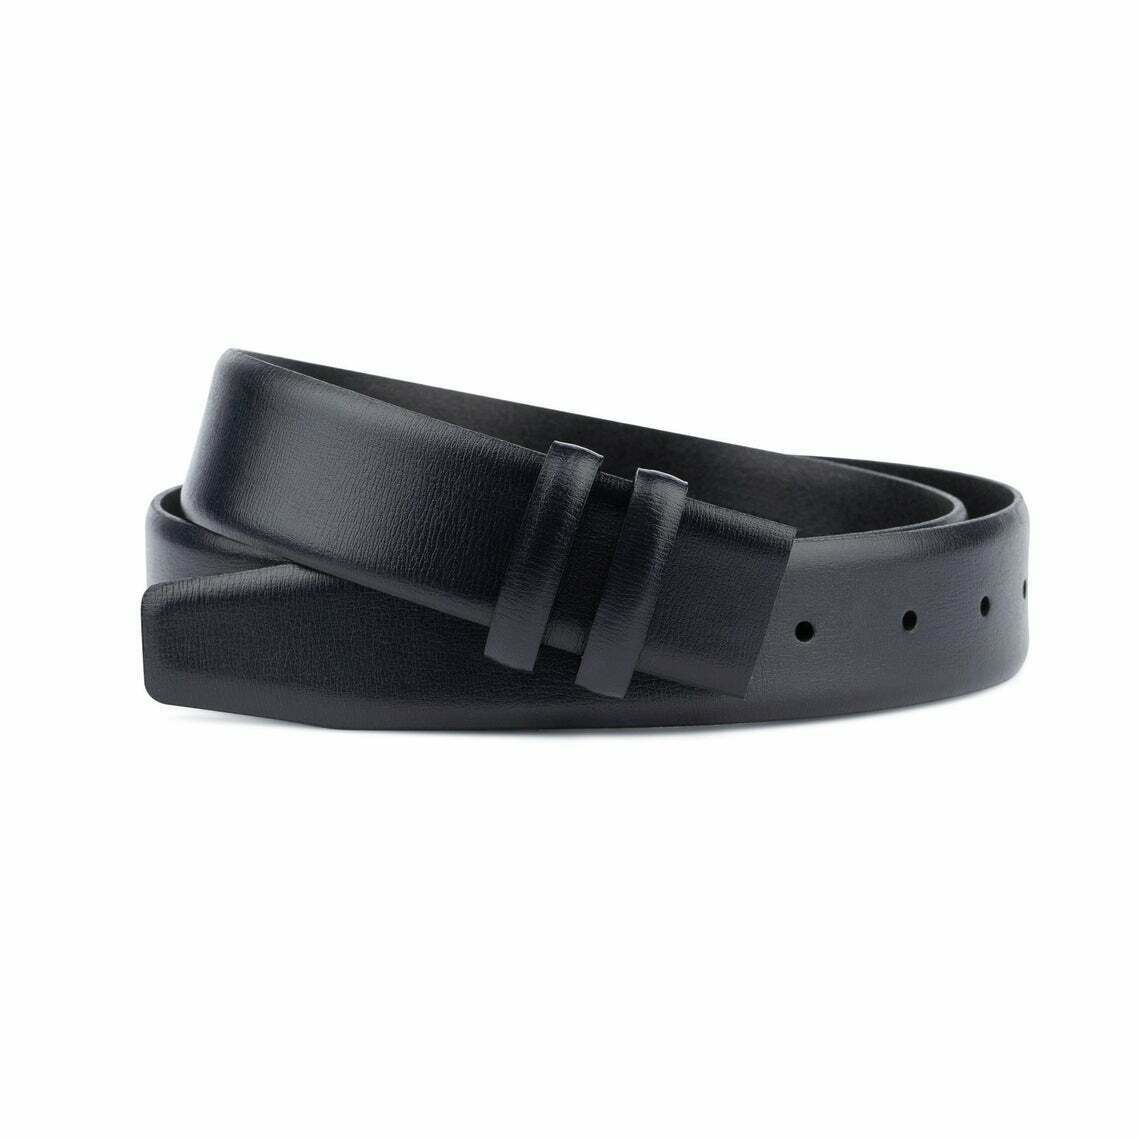 White Belt Mens Strap For Louis Vuitton Buckles 35 Mm Replacement